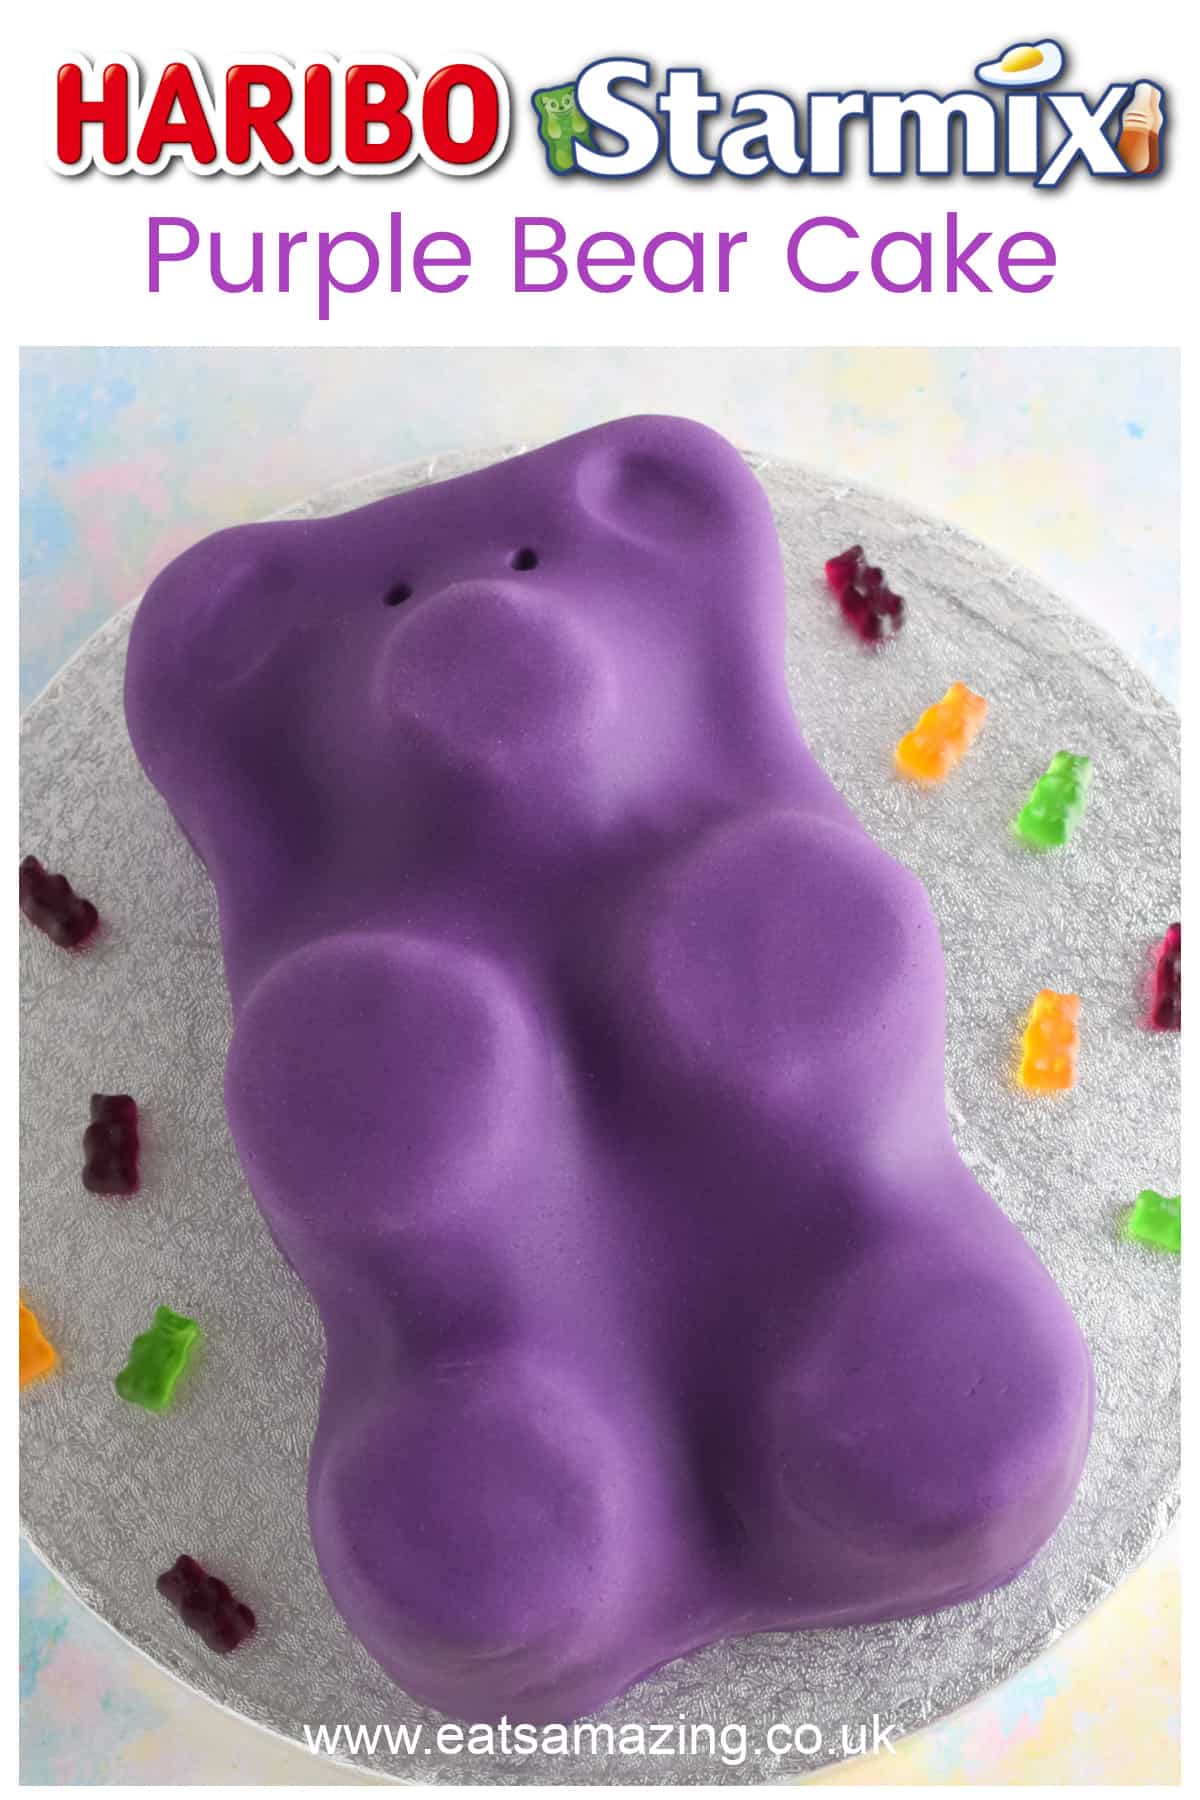 How to make an easy Gummy Bear cake inspired by HARIBO Starmix - with printable recipe and video tutorial